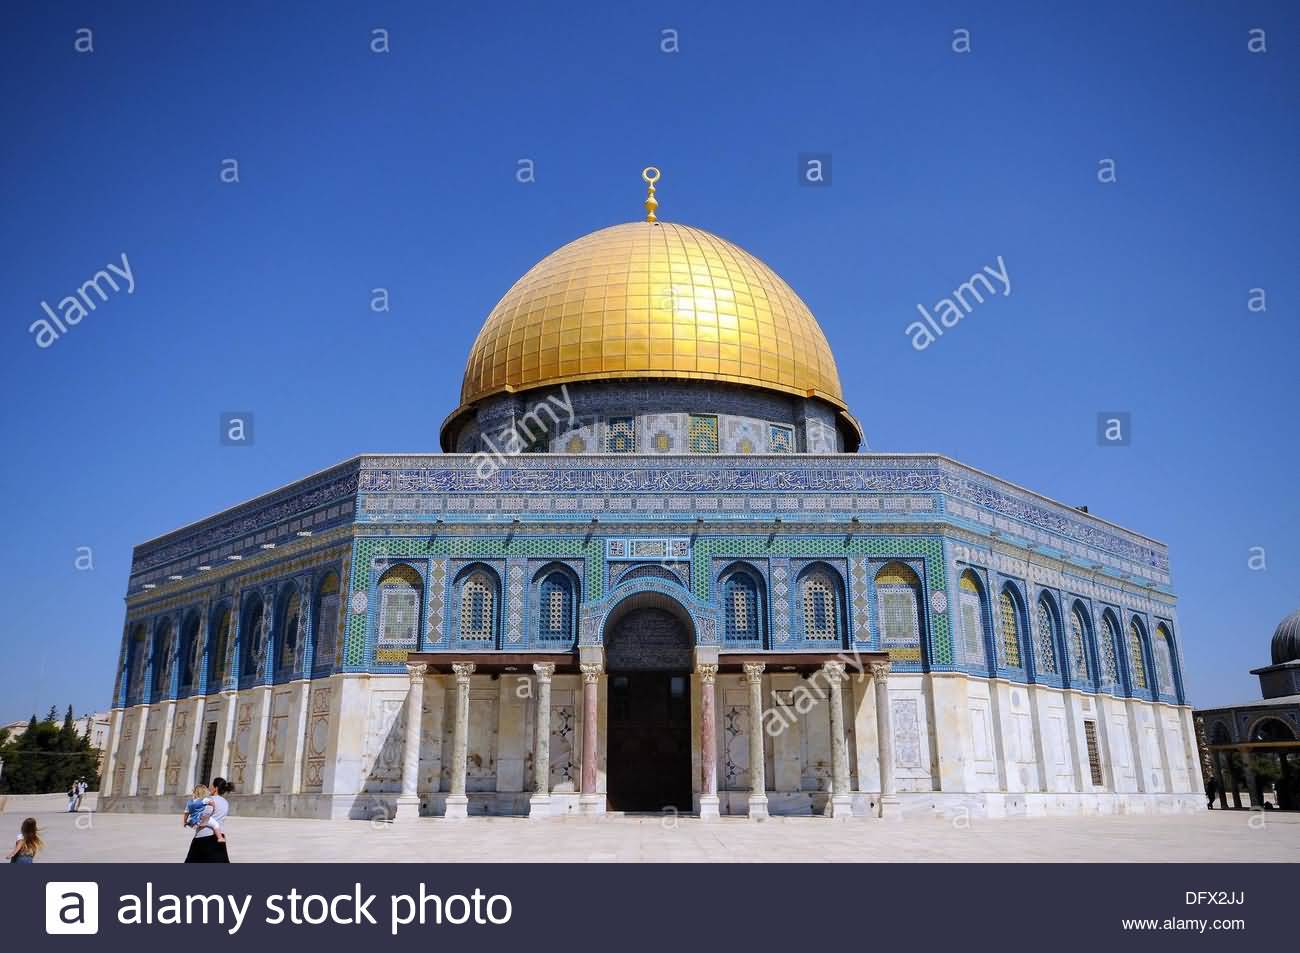 View Of The Entrance Of The Dome Of The Rock On Temple Mount